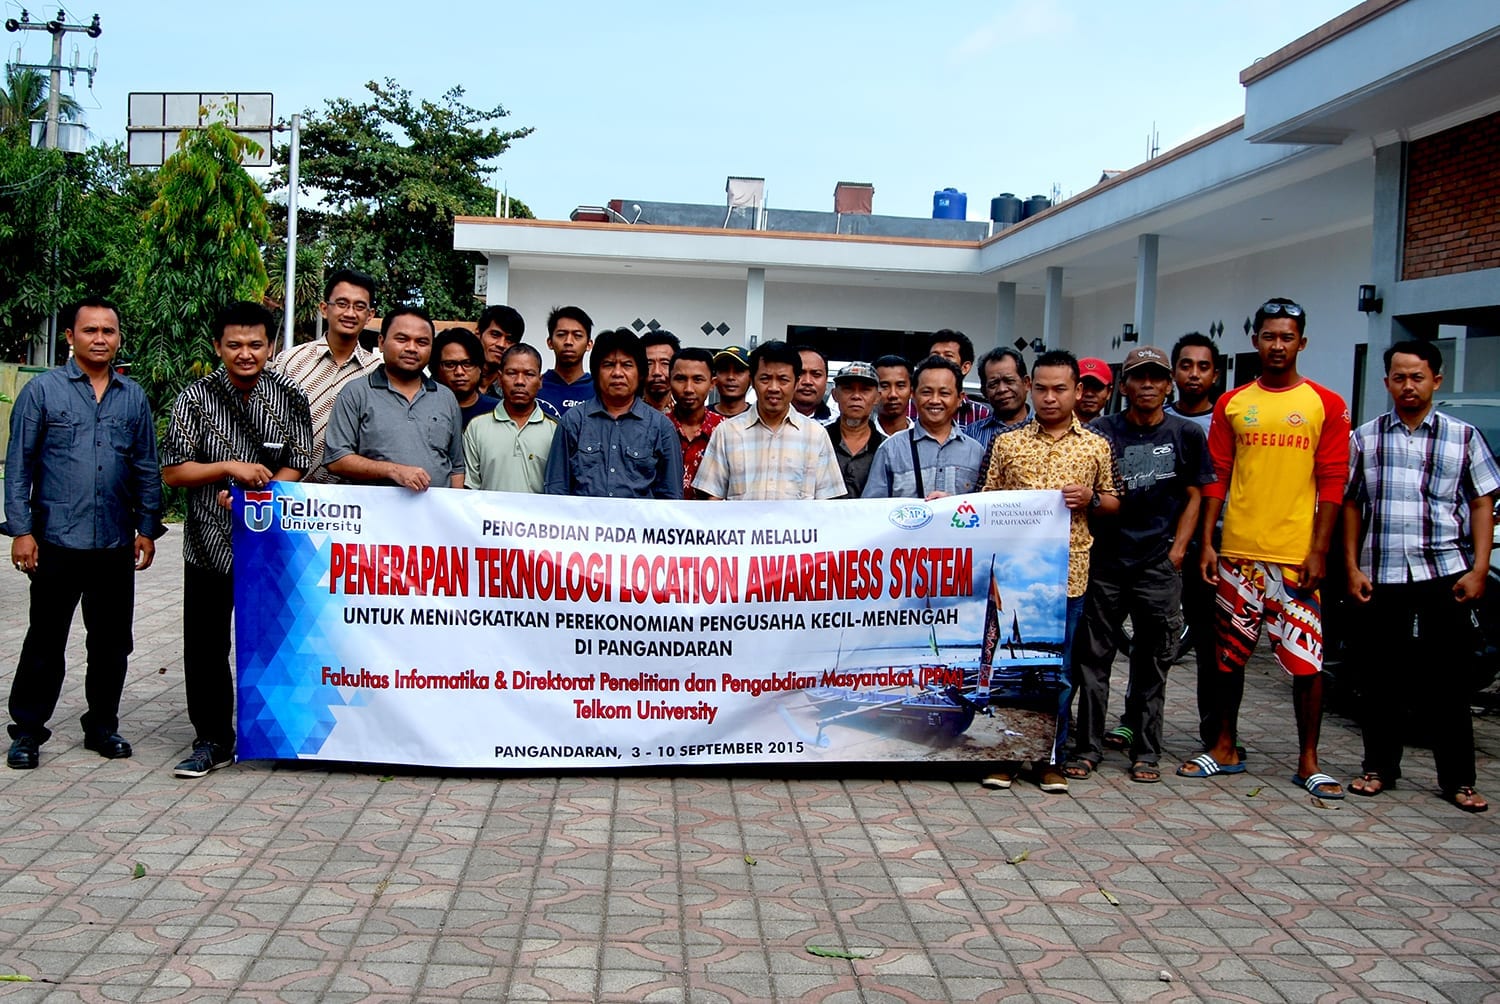 Gallery of Community Service Application of Technology Location Awareness System for Improving the Economy of MSME Entrepreneurs in Pangandaran